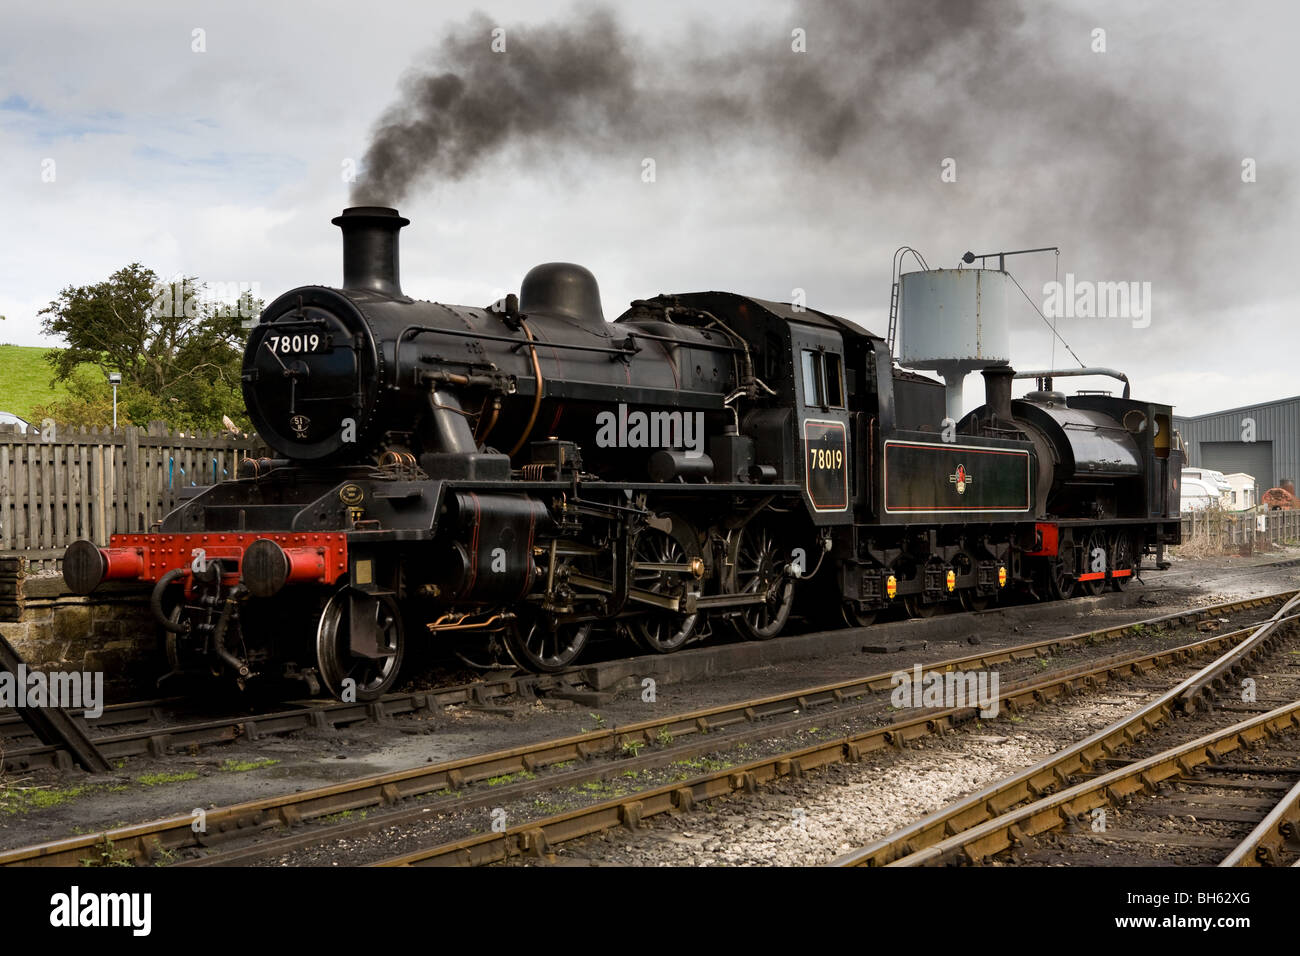 Class 2 Standard No 78019 Engine & Saddle Tank Engine, Embsay & Bolton Abbey Steam Railway, Yorkshire Dales, England Stock Photo